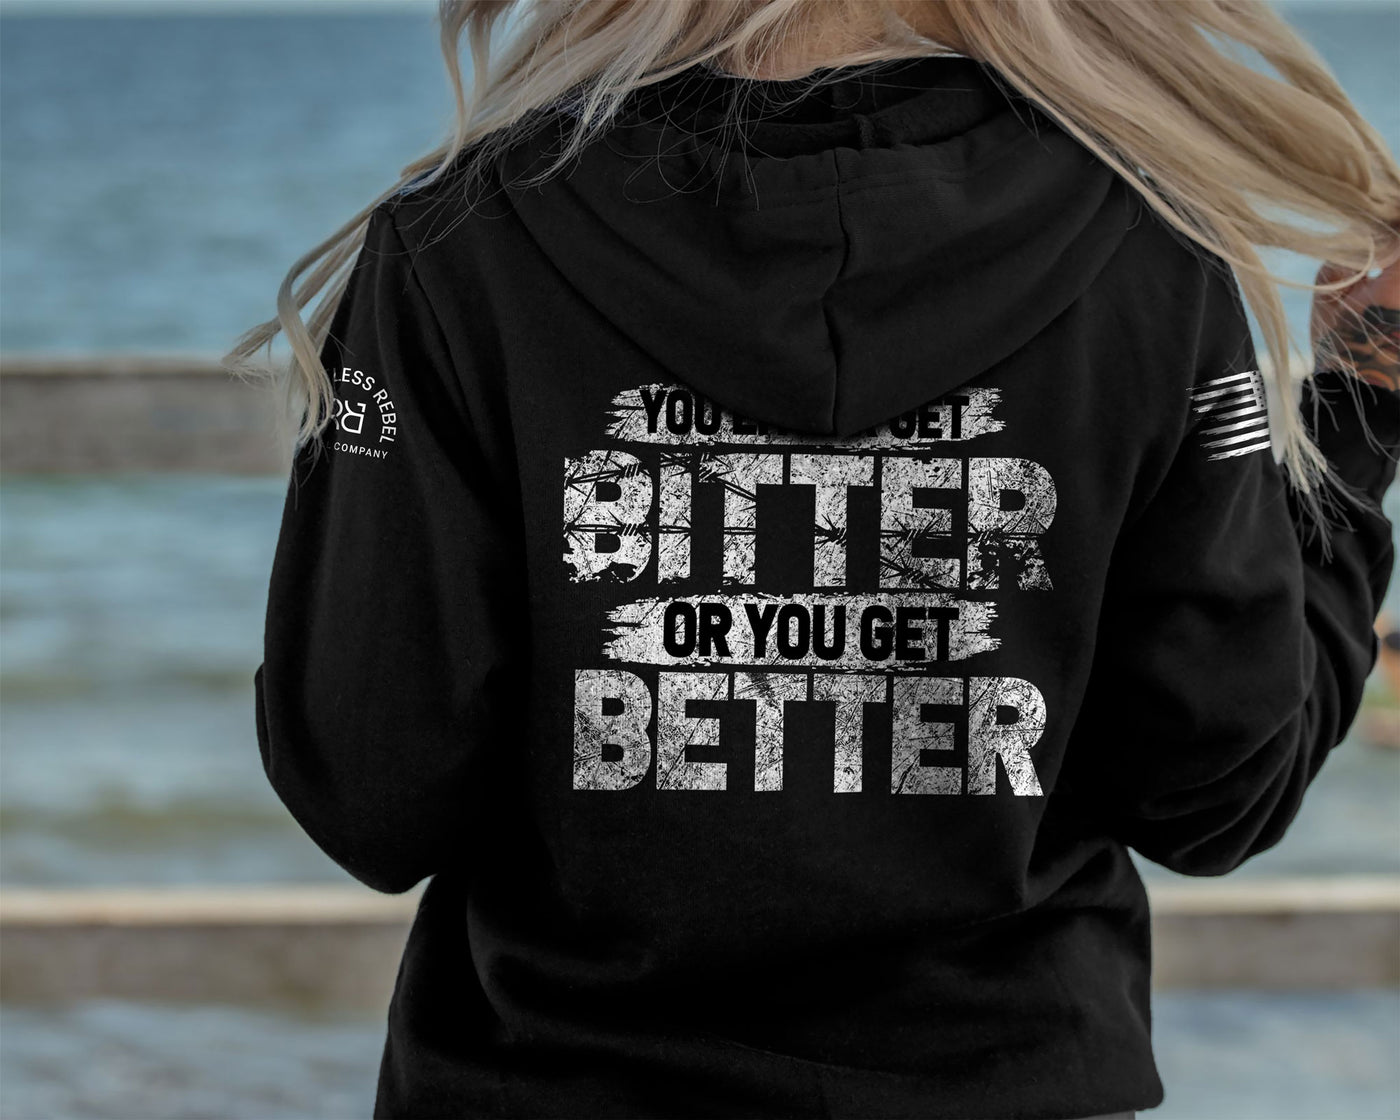 You Either Get Bitter or You Get Better | Women's Hoodie